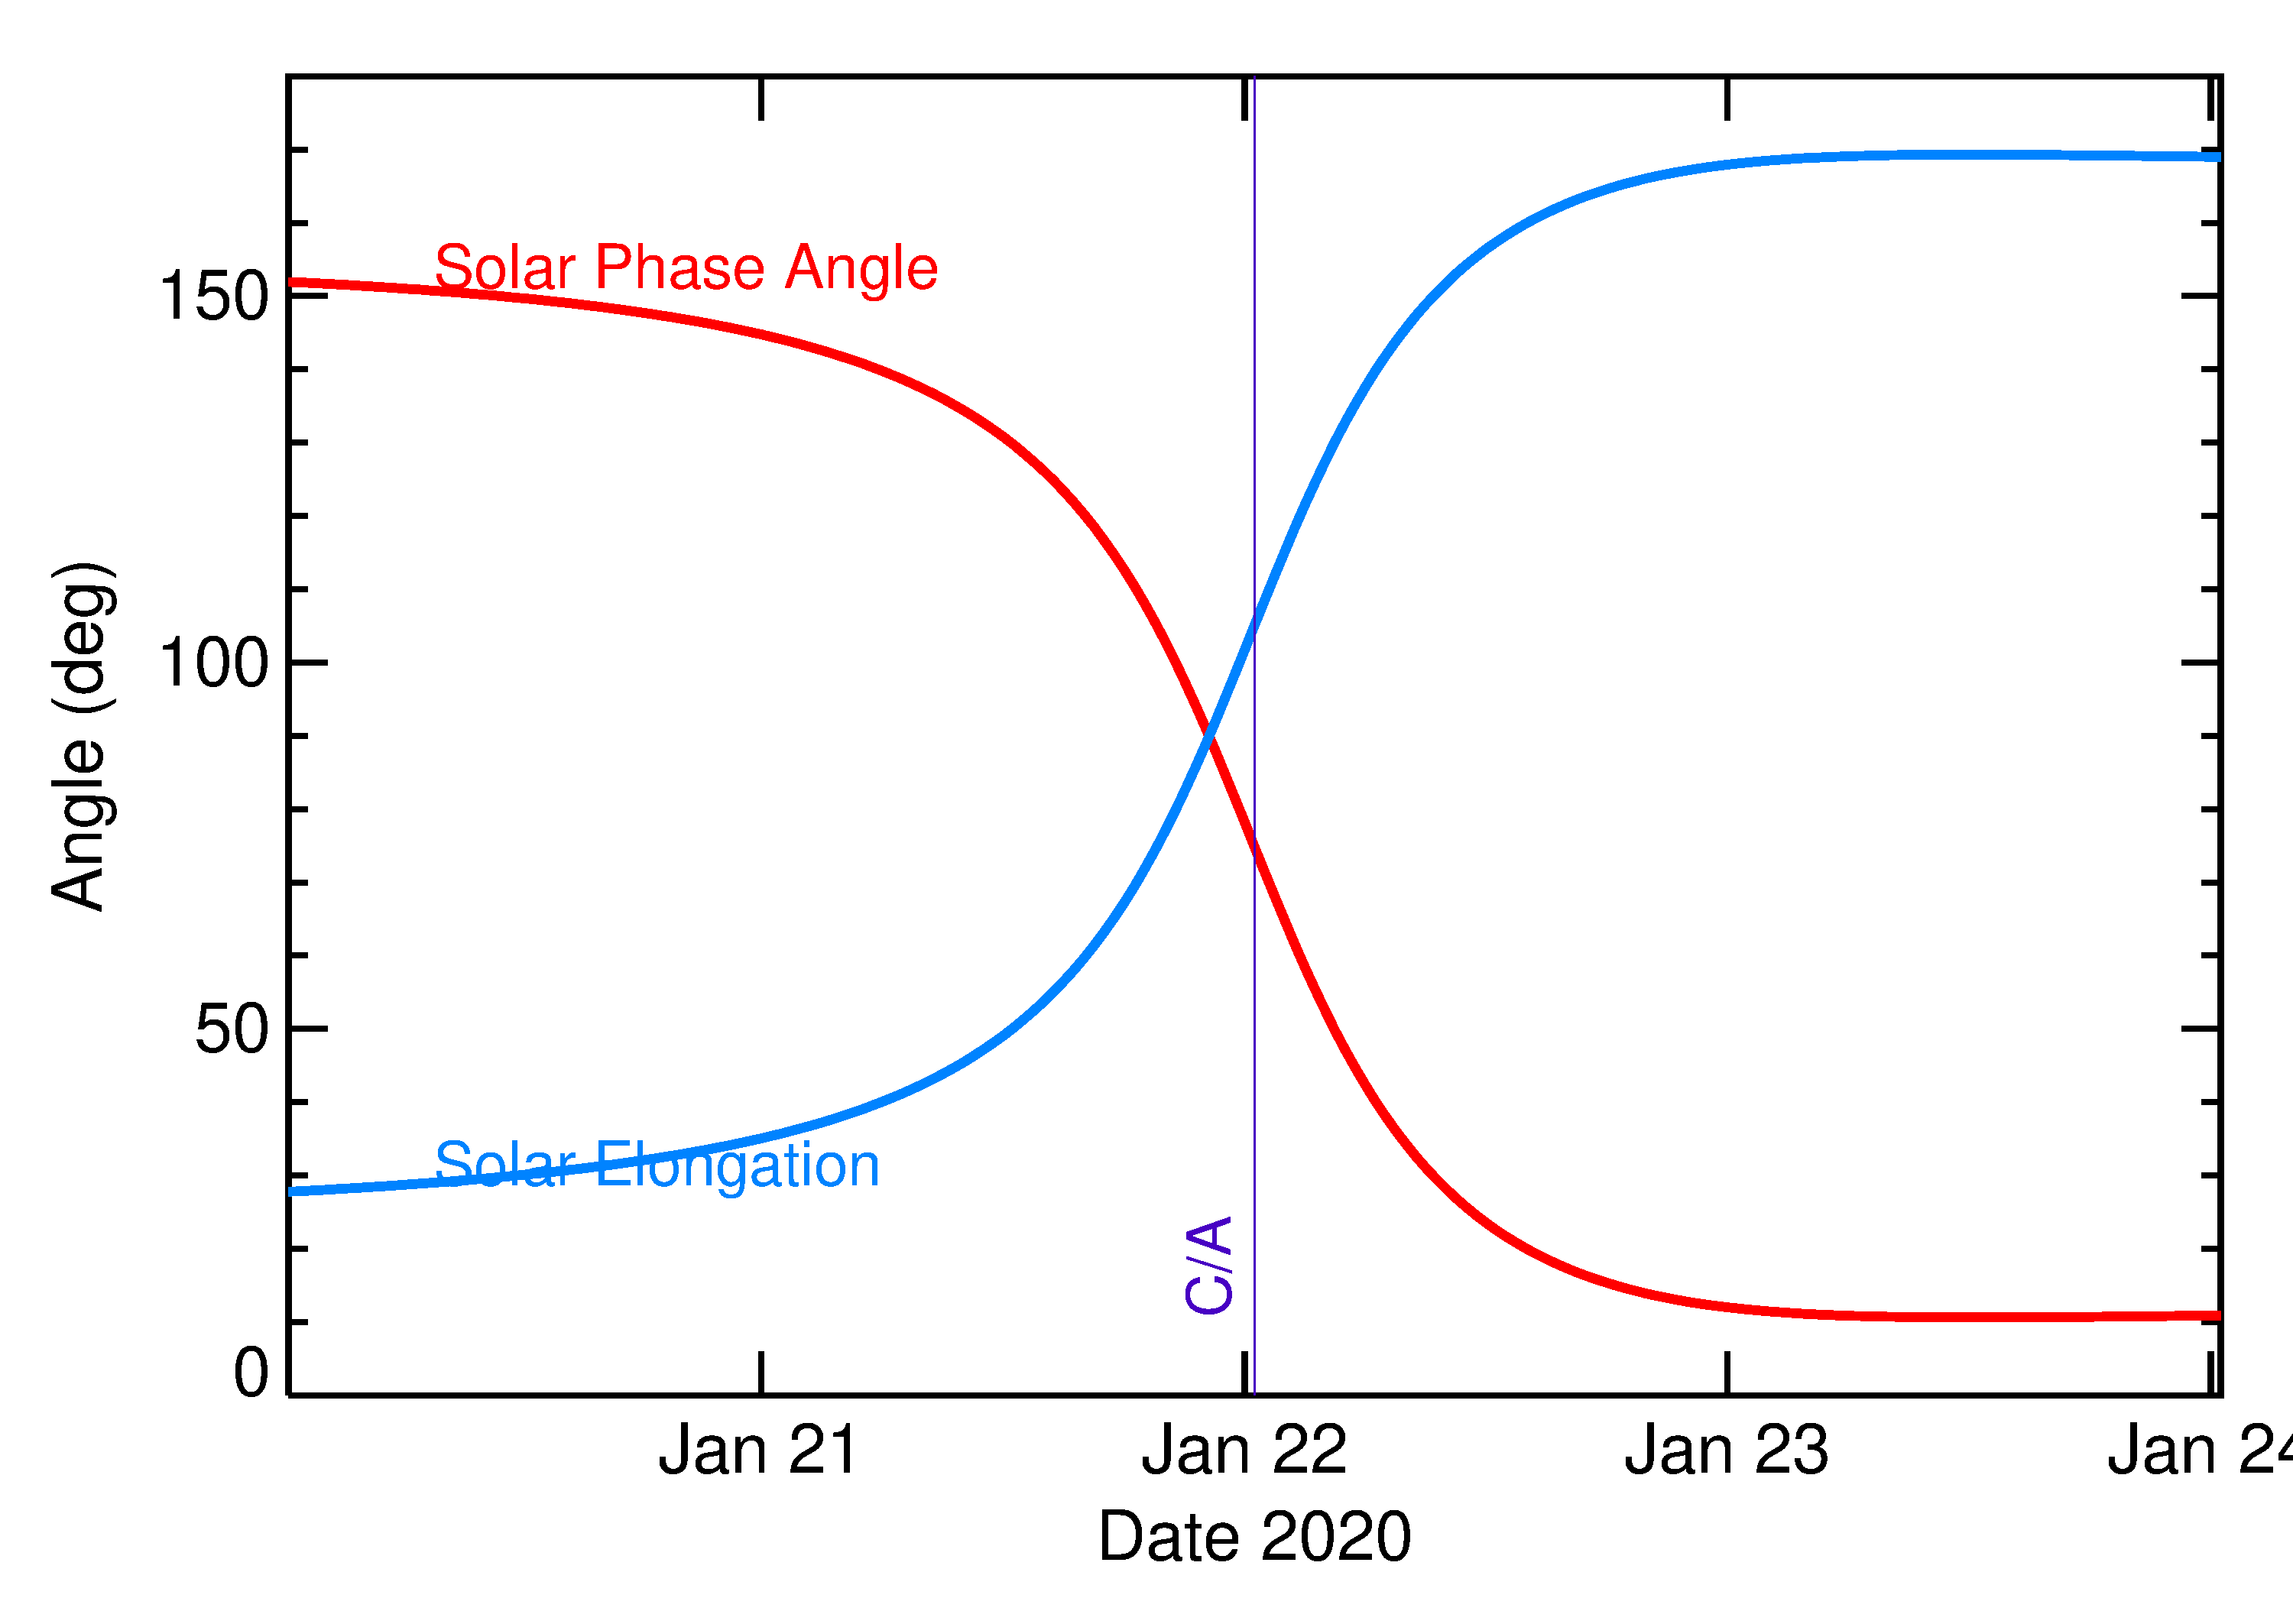 Solar Elongation and Solar Phase Angle of 2020 BB5 in the days around closest approach